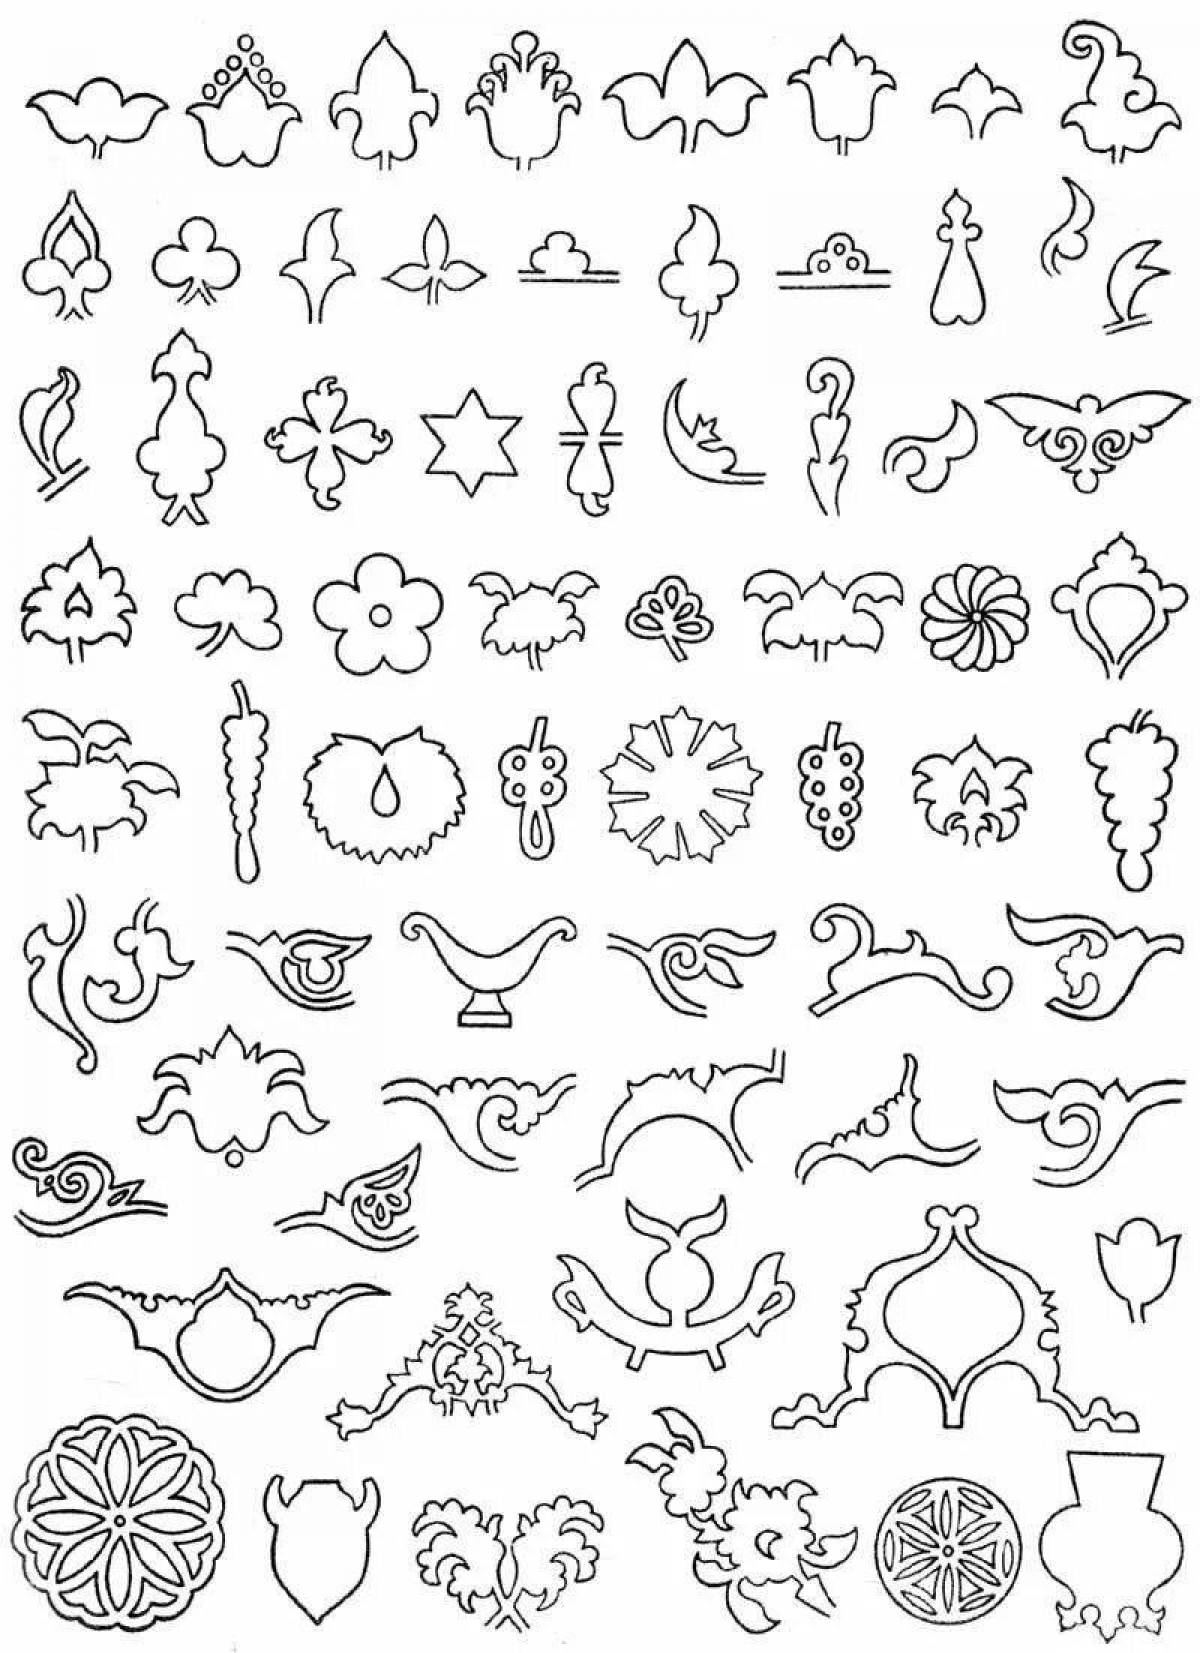 Coloring page gentle tatar patterns